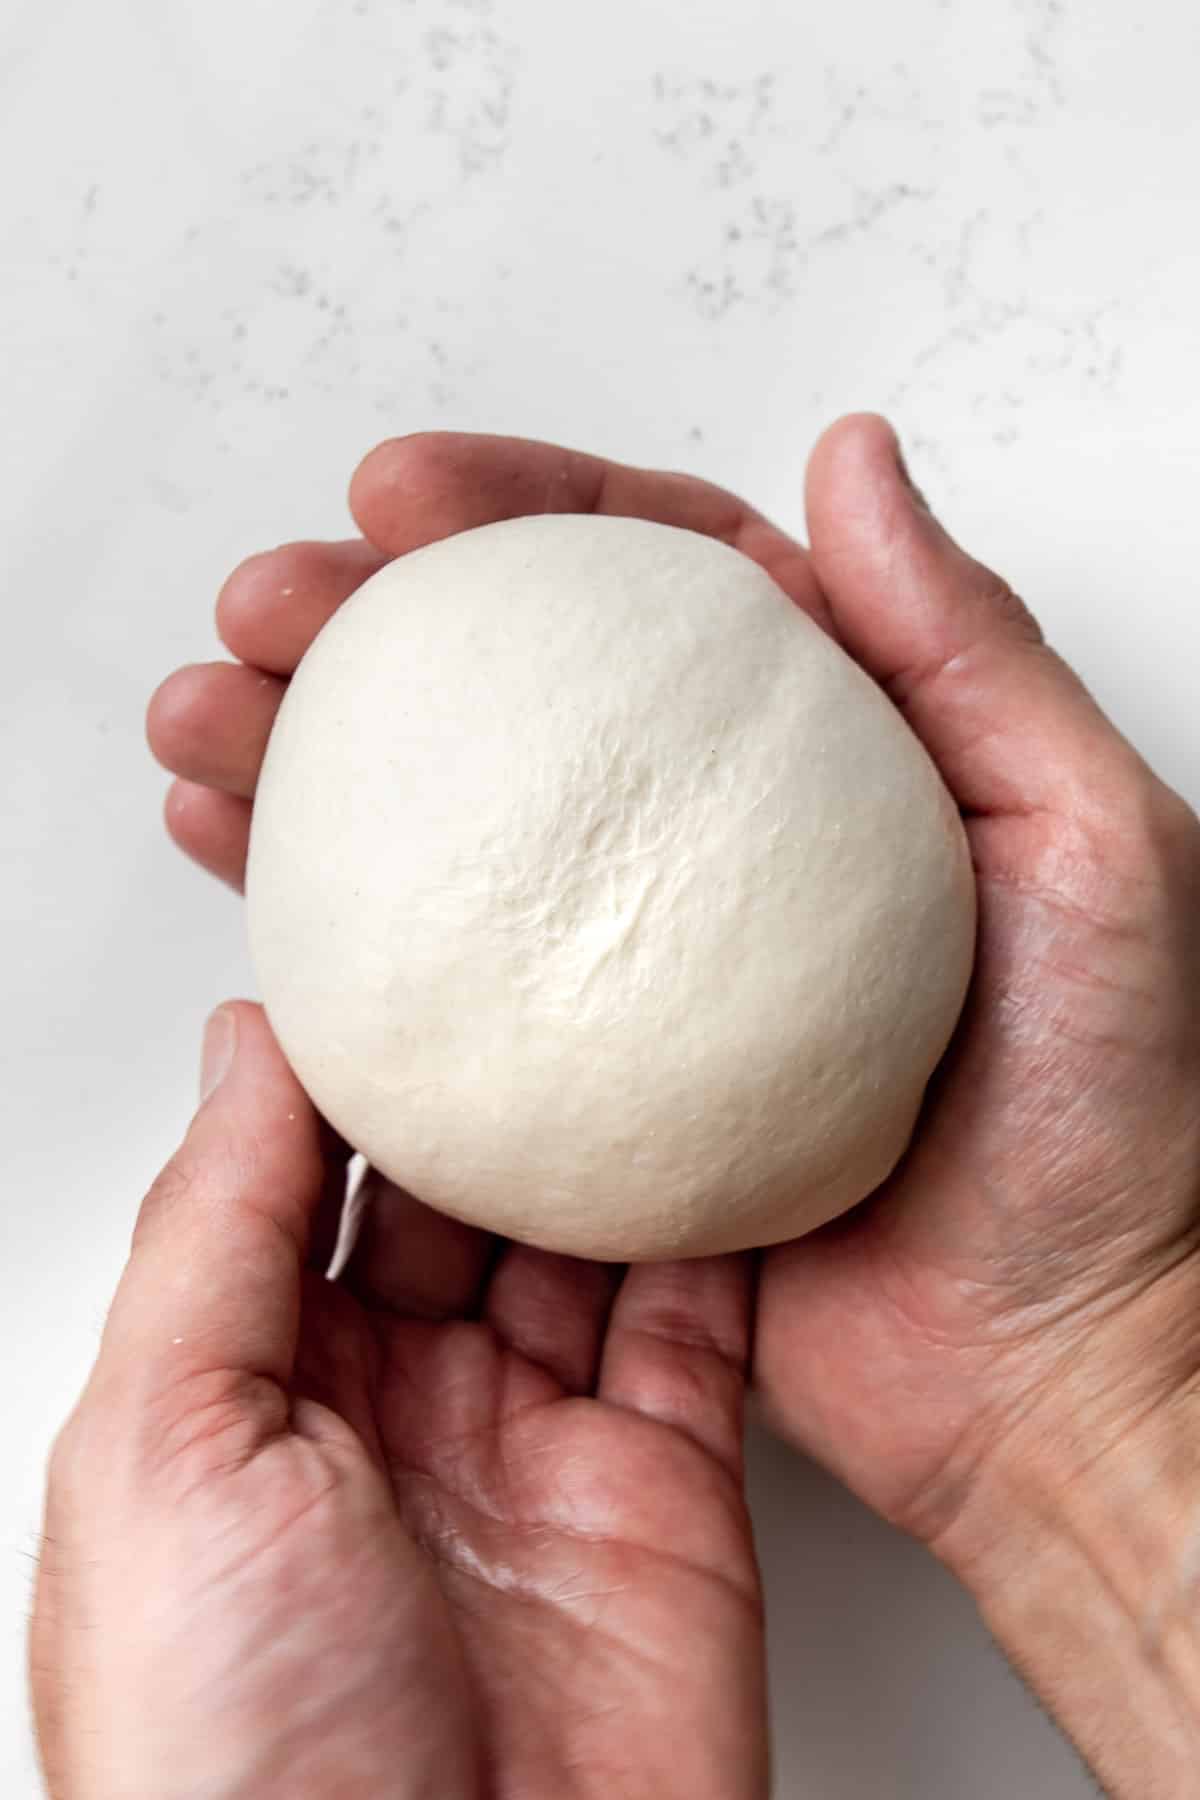 hand holding a ball of pizza dough.